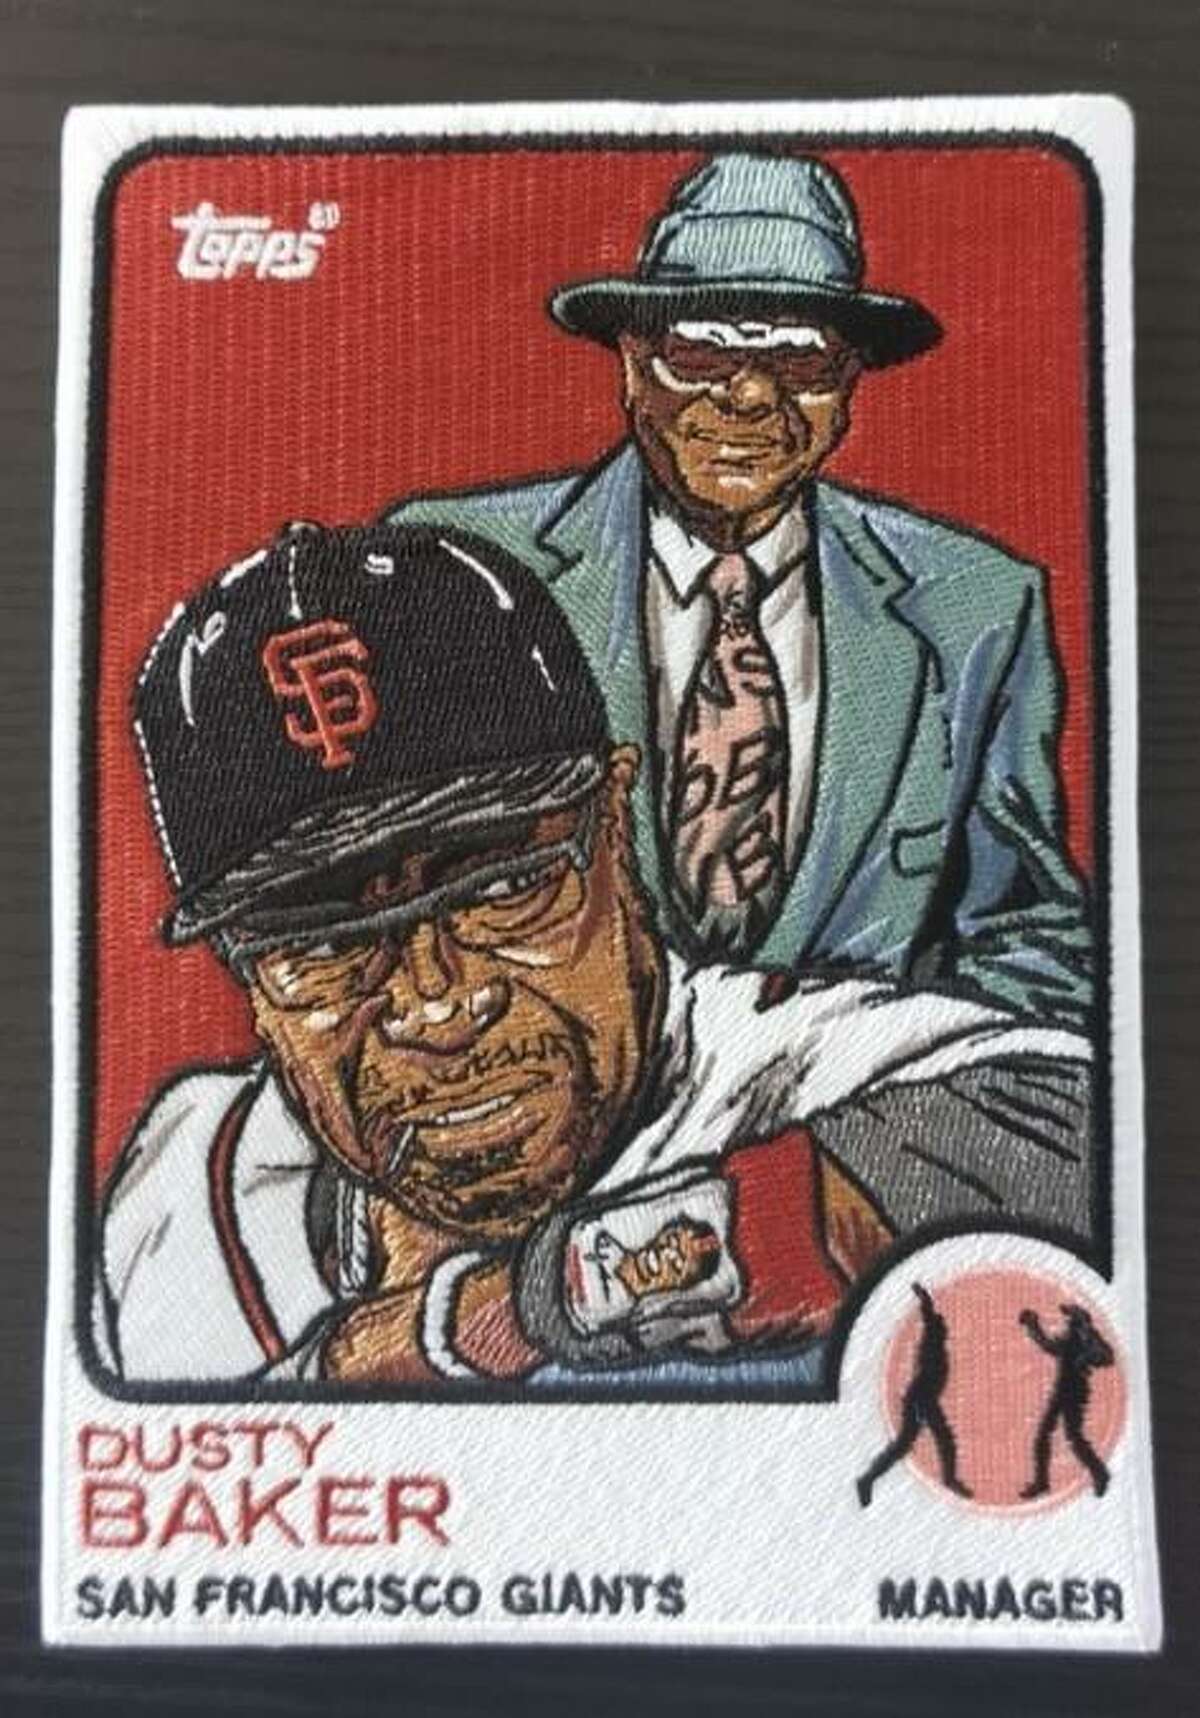 Houston Astros manager Dusty Baker and his wristbands as works of art